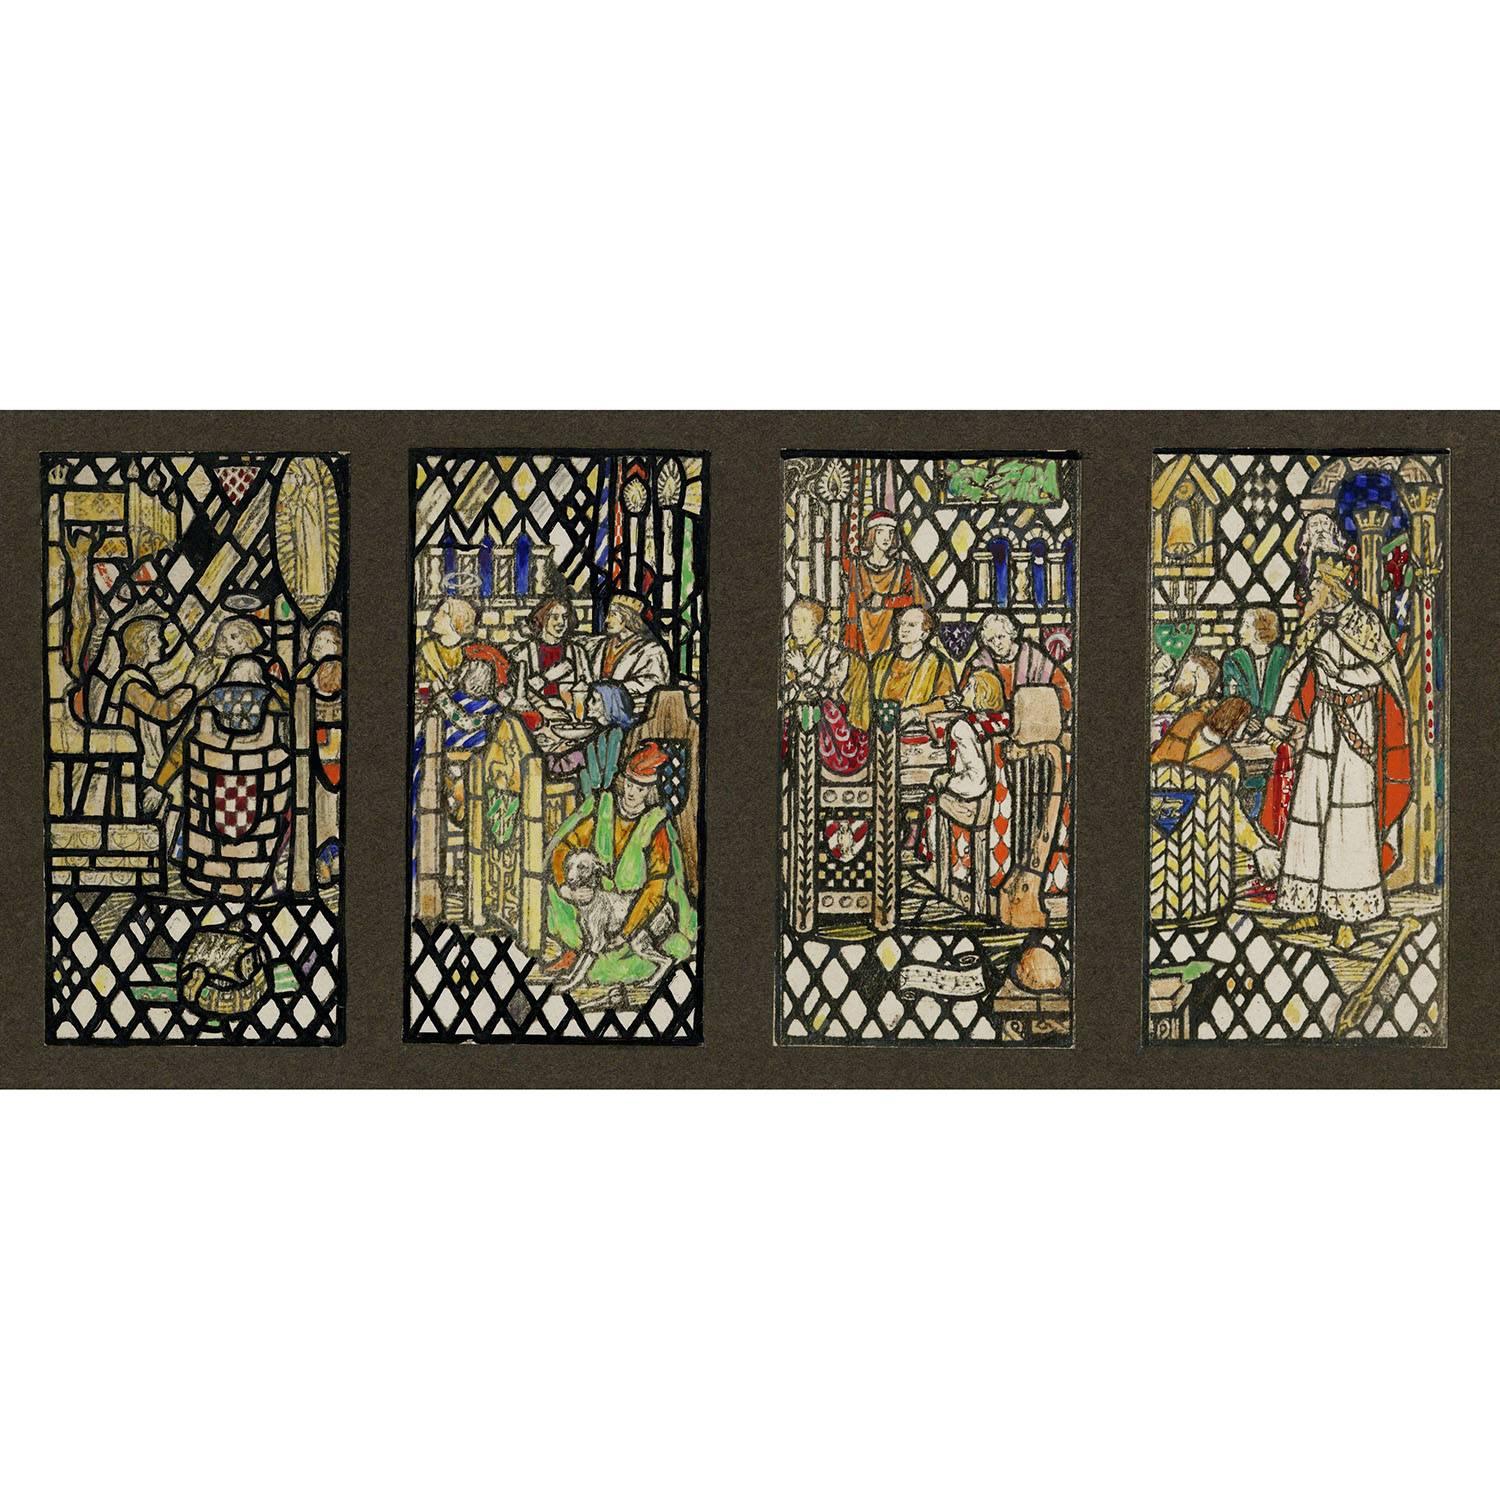 Florence and Walter Camm Landscape Art - Four Arthurian Stained Glass Window Designs For Mercersburg Academy Chapel, PA